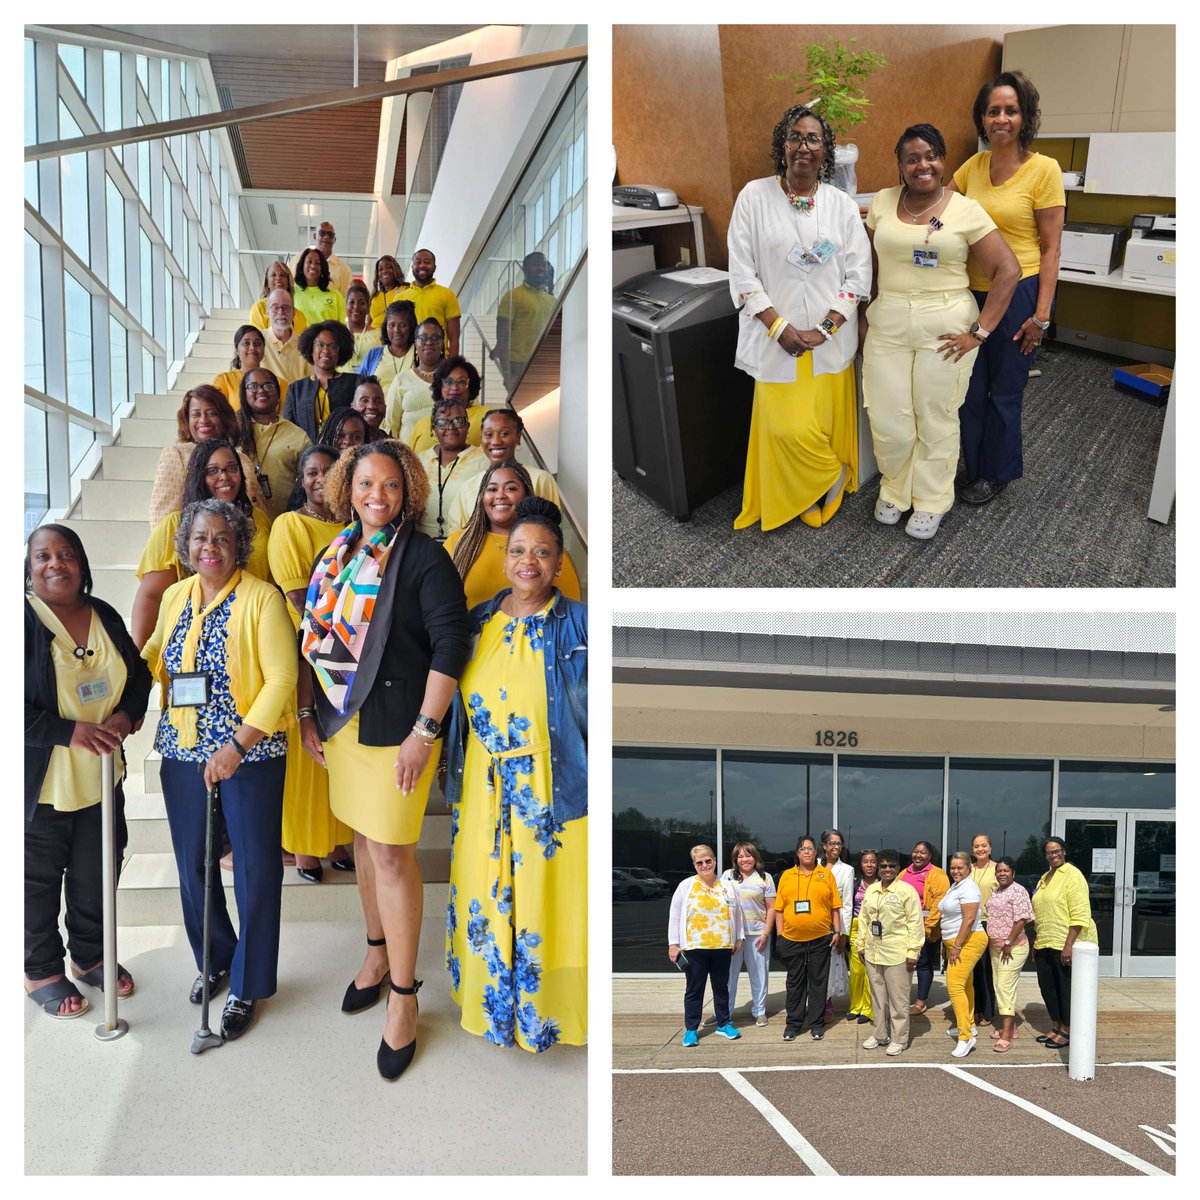 To close out a very successful #BlackMaternalHealthWeek, @ShelbyTNHealth team members wore yellow today to symbolize their hope for improving Black maternal health outcomes. #HerStoryIsOurStory @BlkmamasMatter @bigcitieshealth @hrsagov